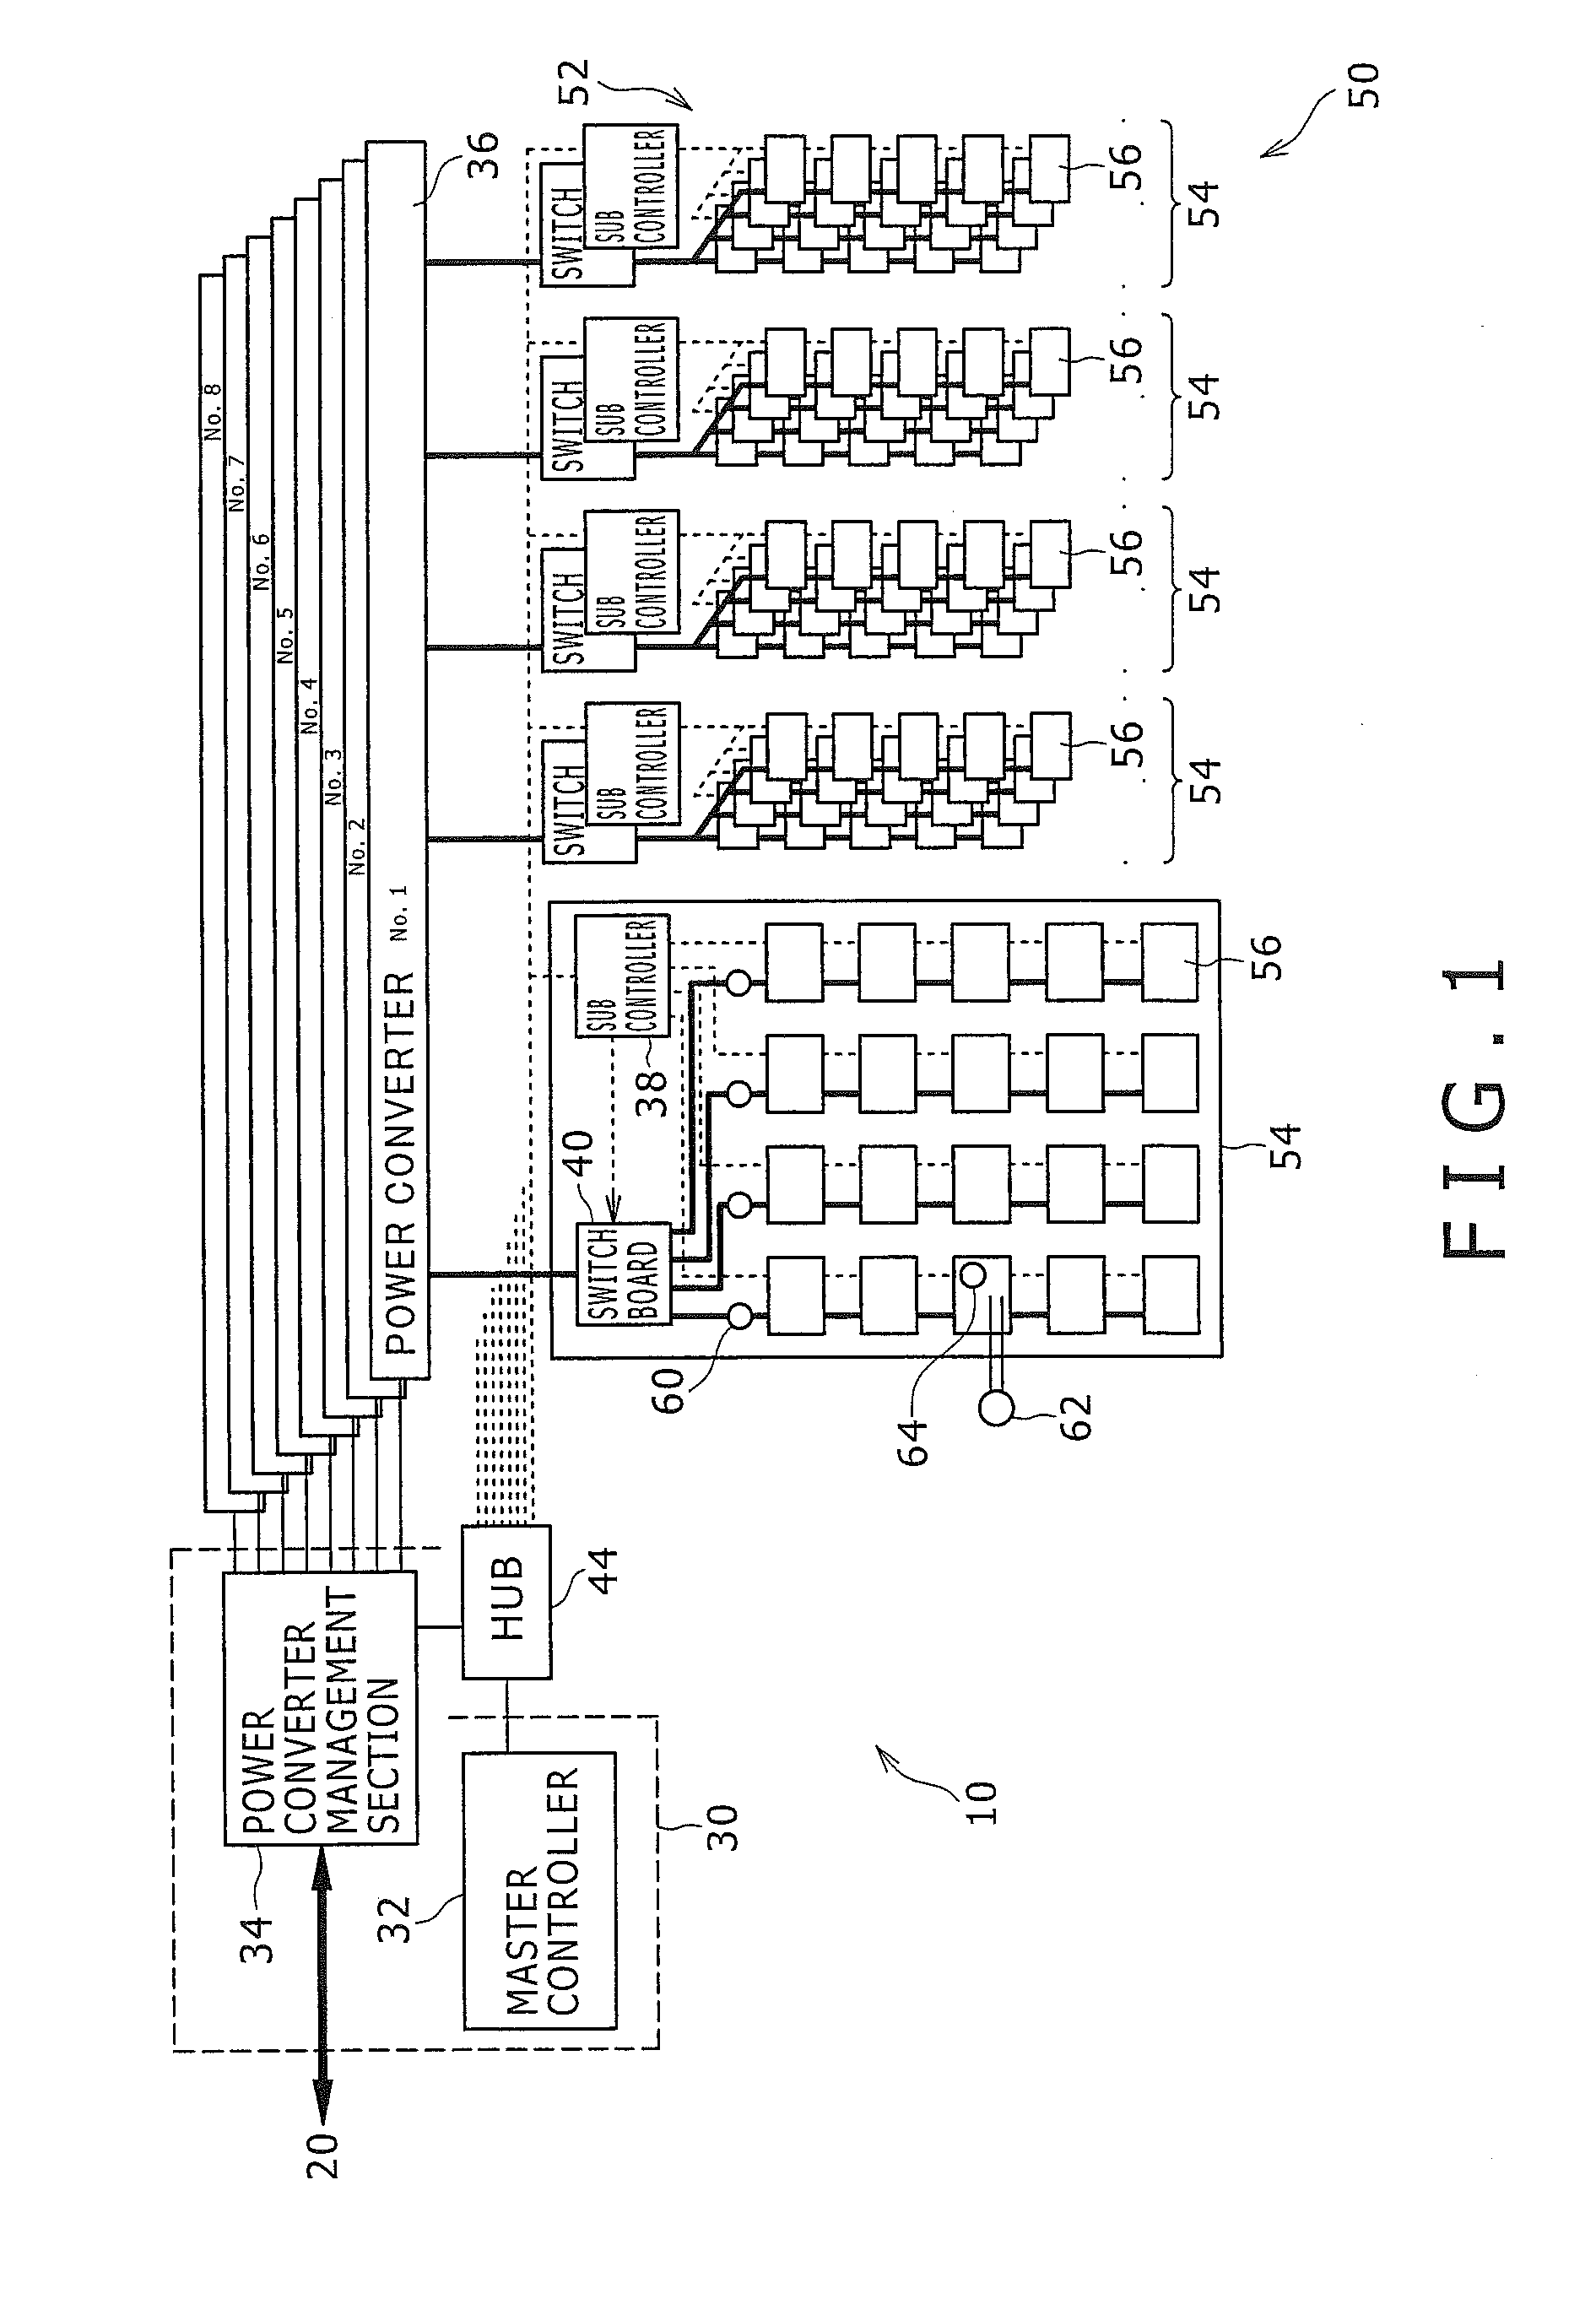 Battery charge and discharge control apparatus and method for controlling battery charge and discharge